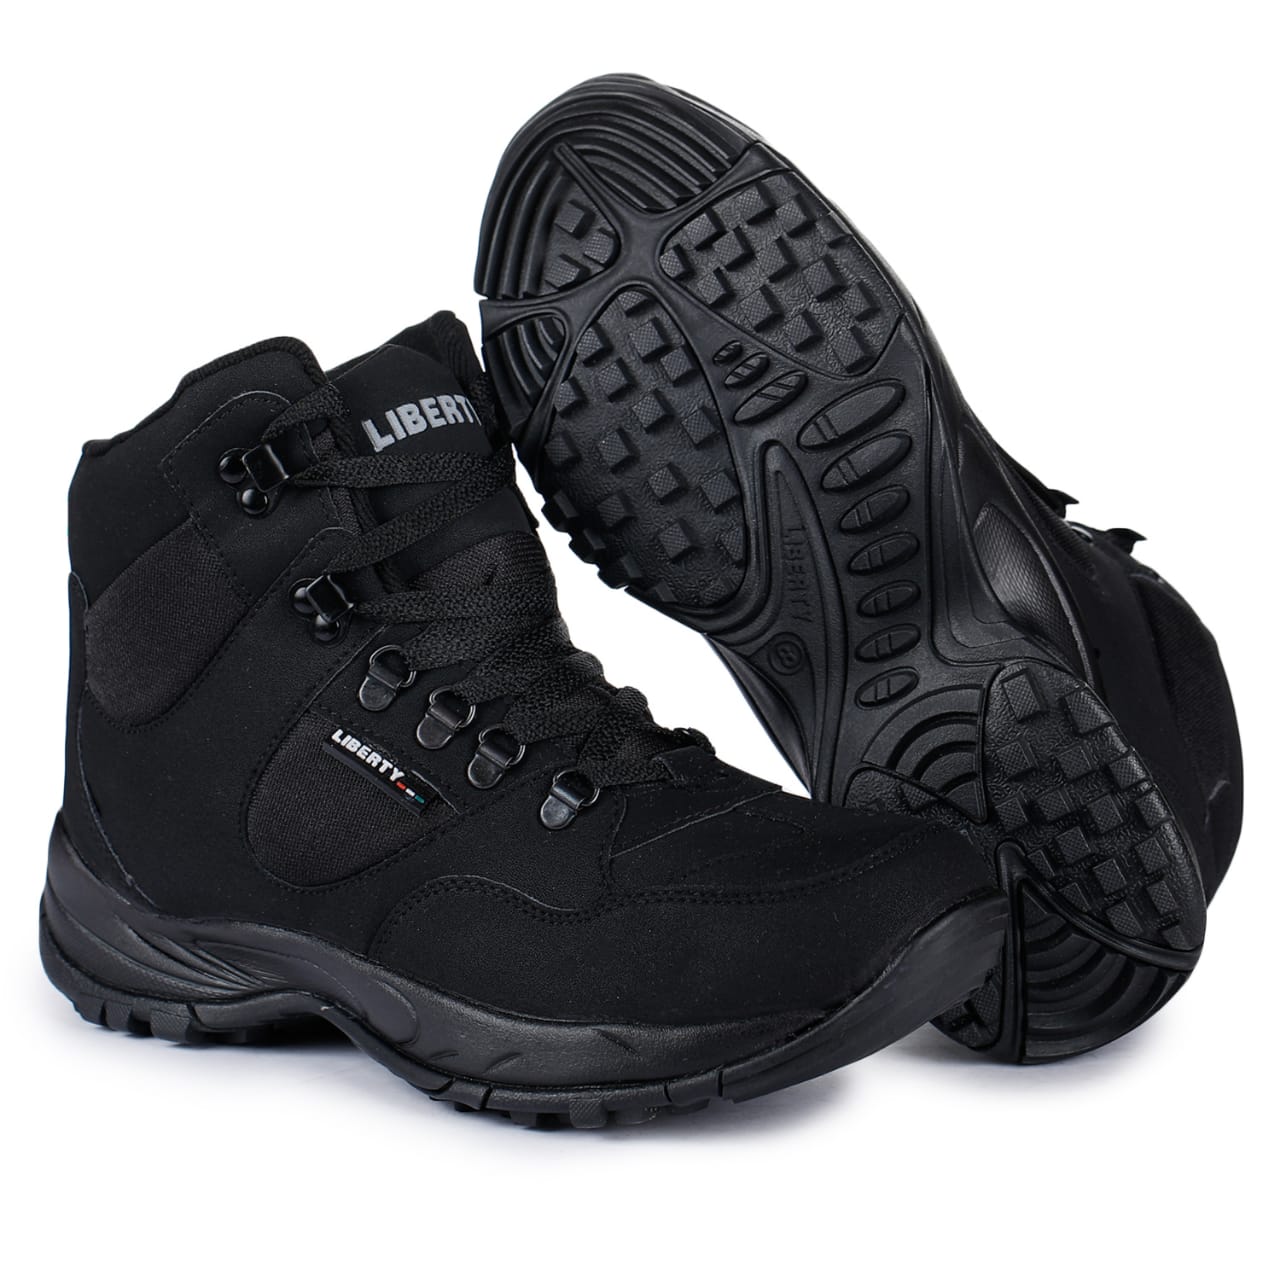 LIBERTY Freedom EVEREST-4 Boots Boots For Men - Buy LIBERTY Freedom  EVEREST-4 Boots Boots For Men Online at Best Price - Shop Online for  Footwears in India | Flipkart.com